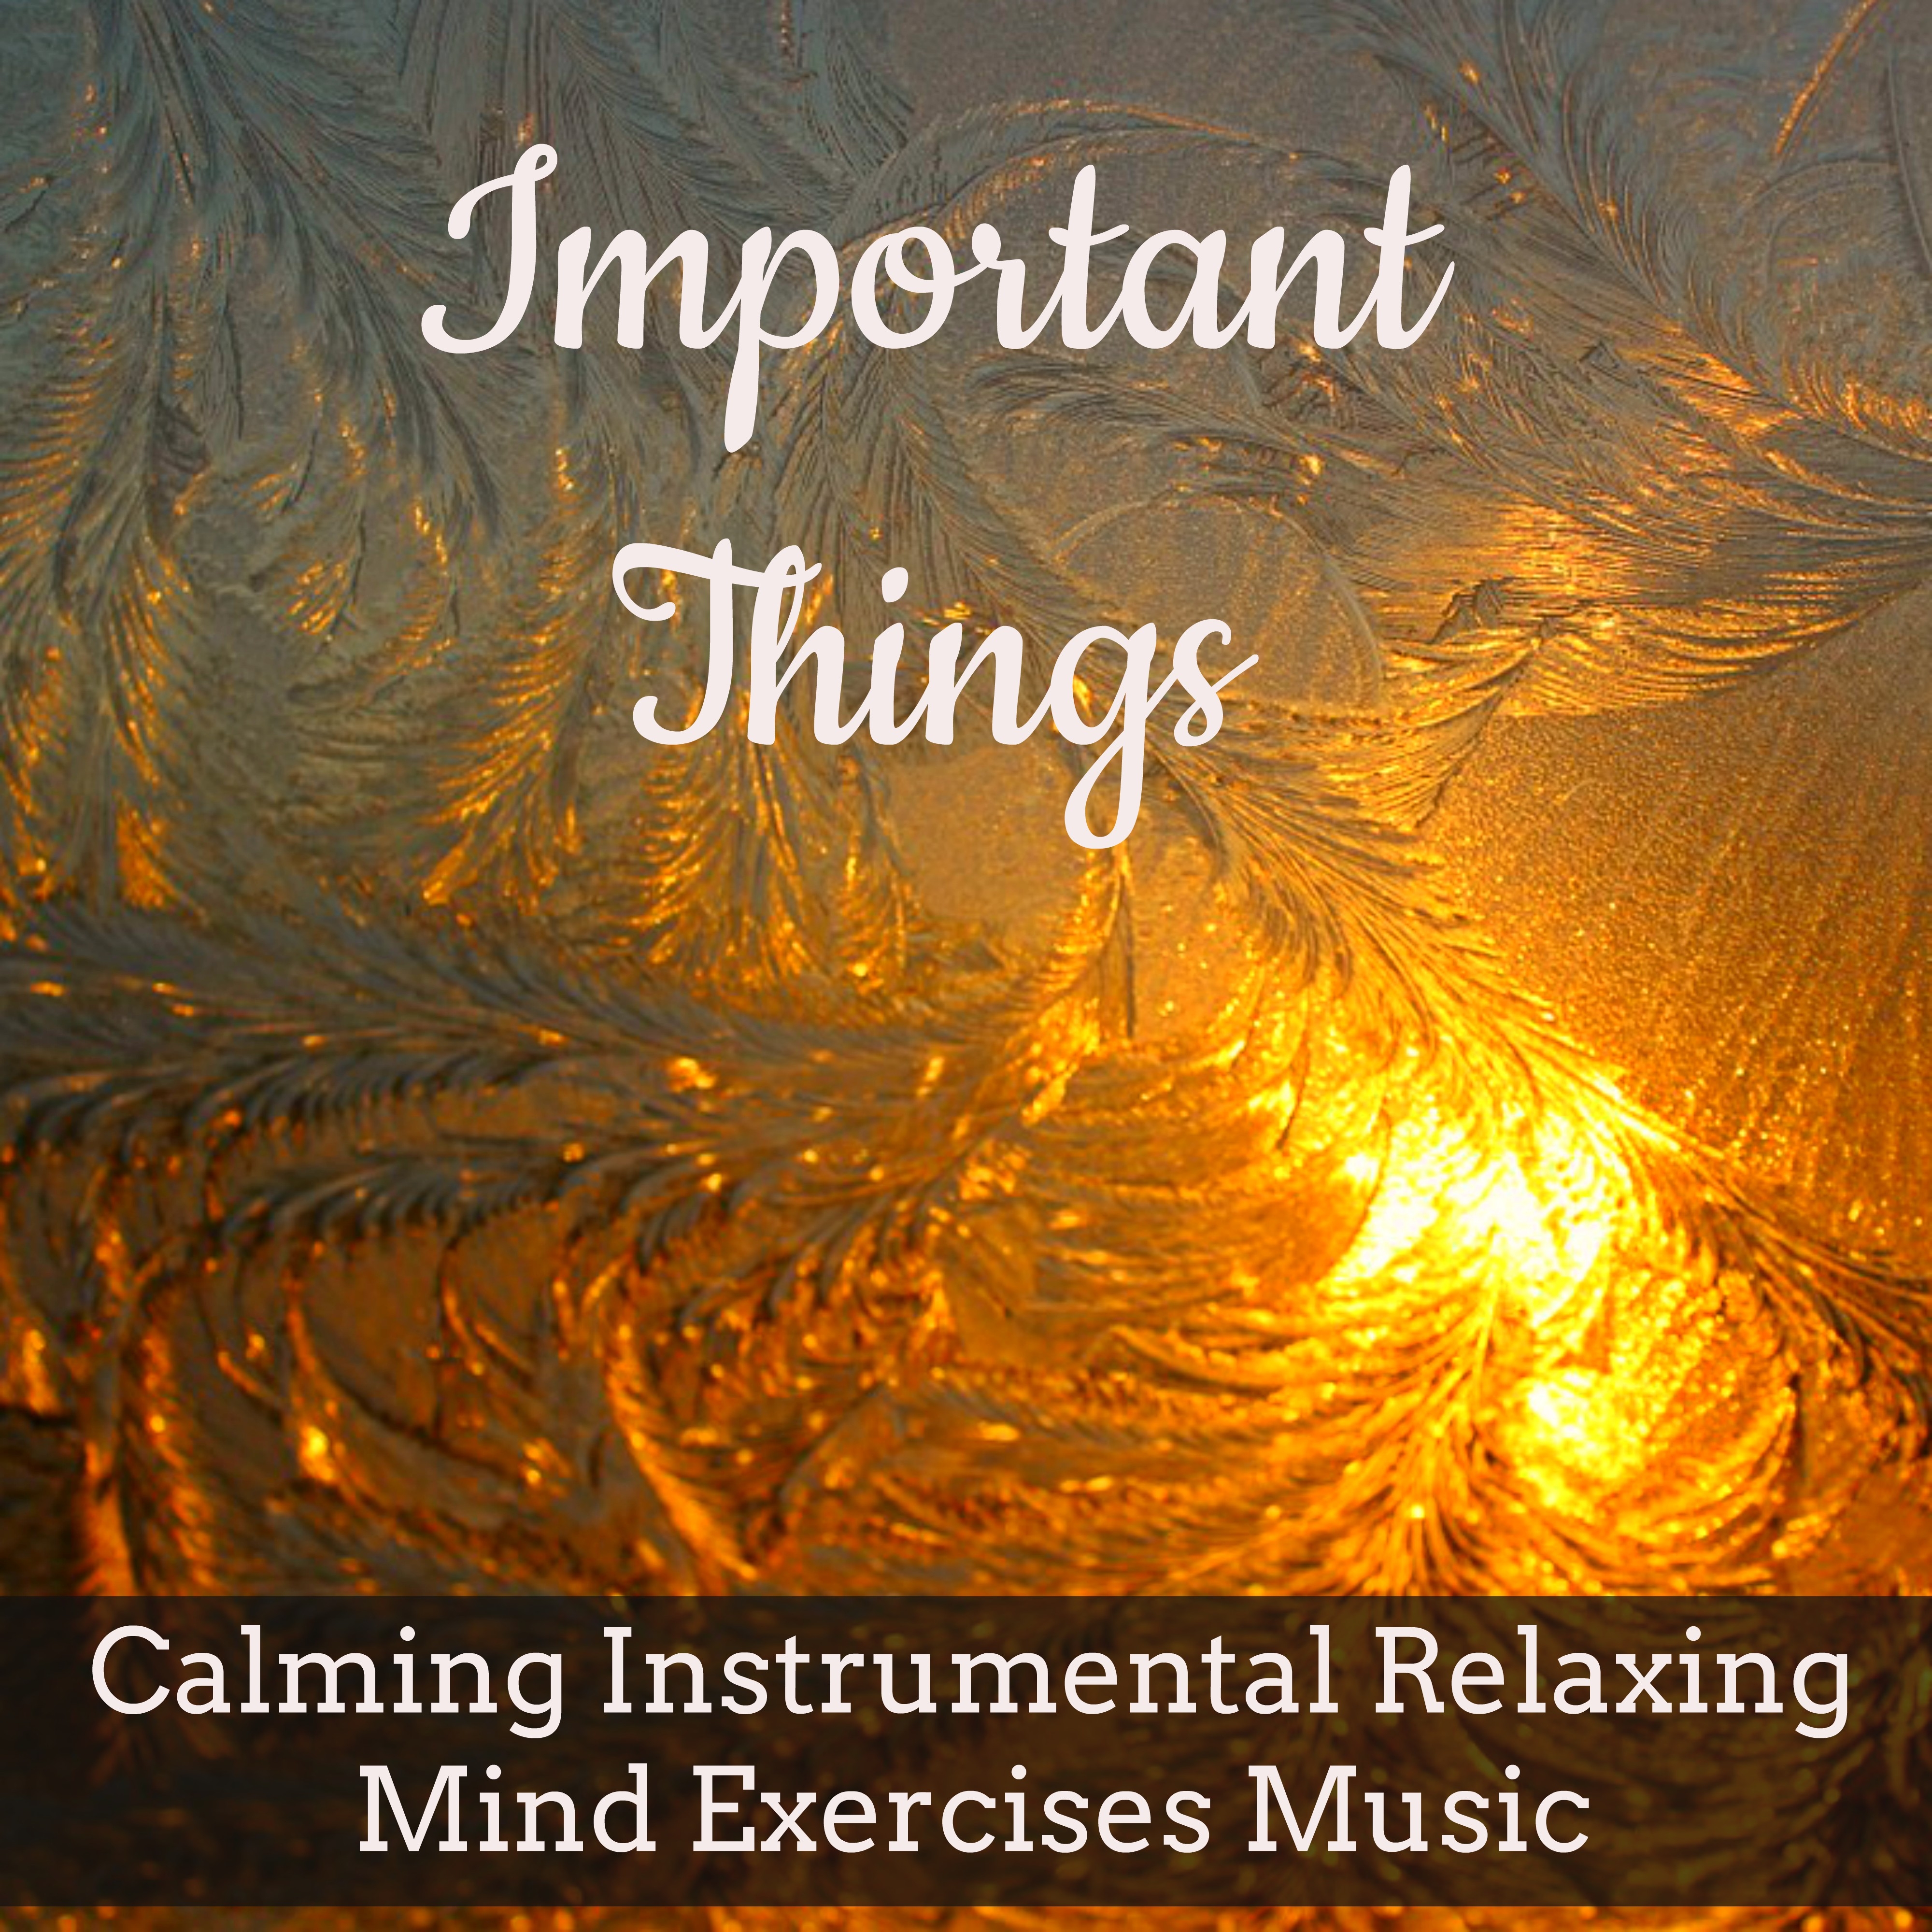 Important Things - Calming Instrumental Relaxing Mind Exercises Music for Happy Christmas Silent Night Stay Together with Nature Sweet Meditative Sounds